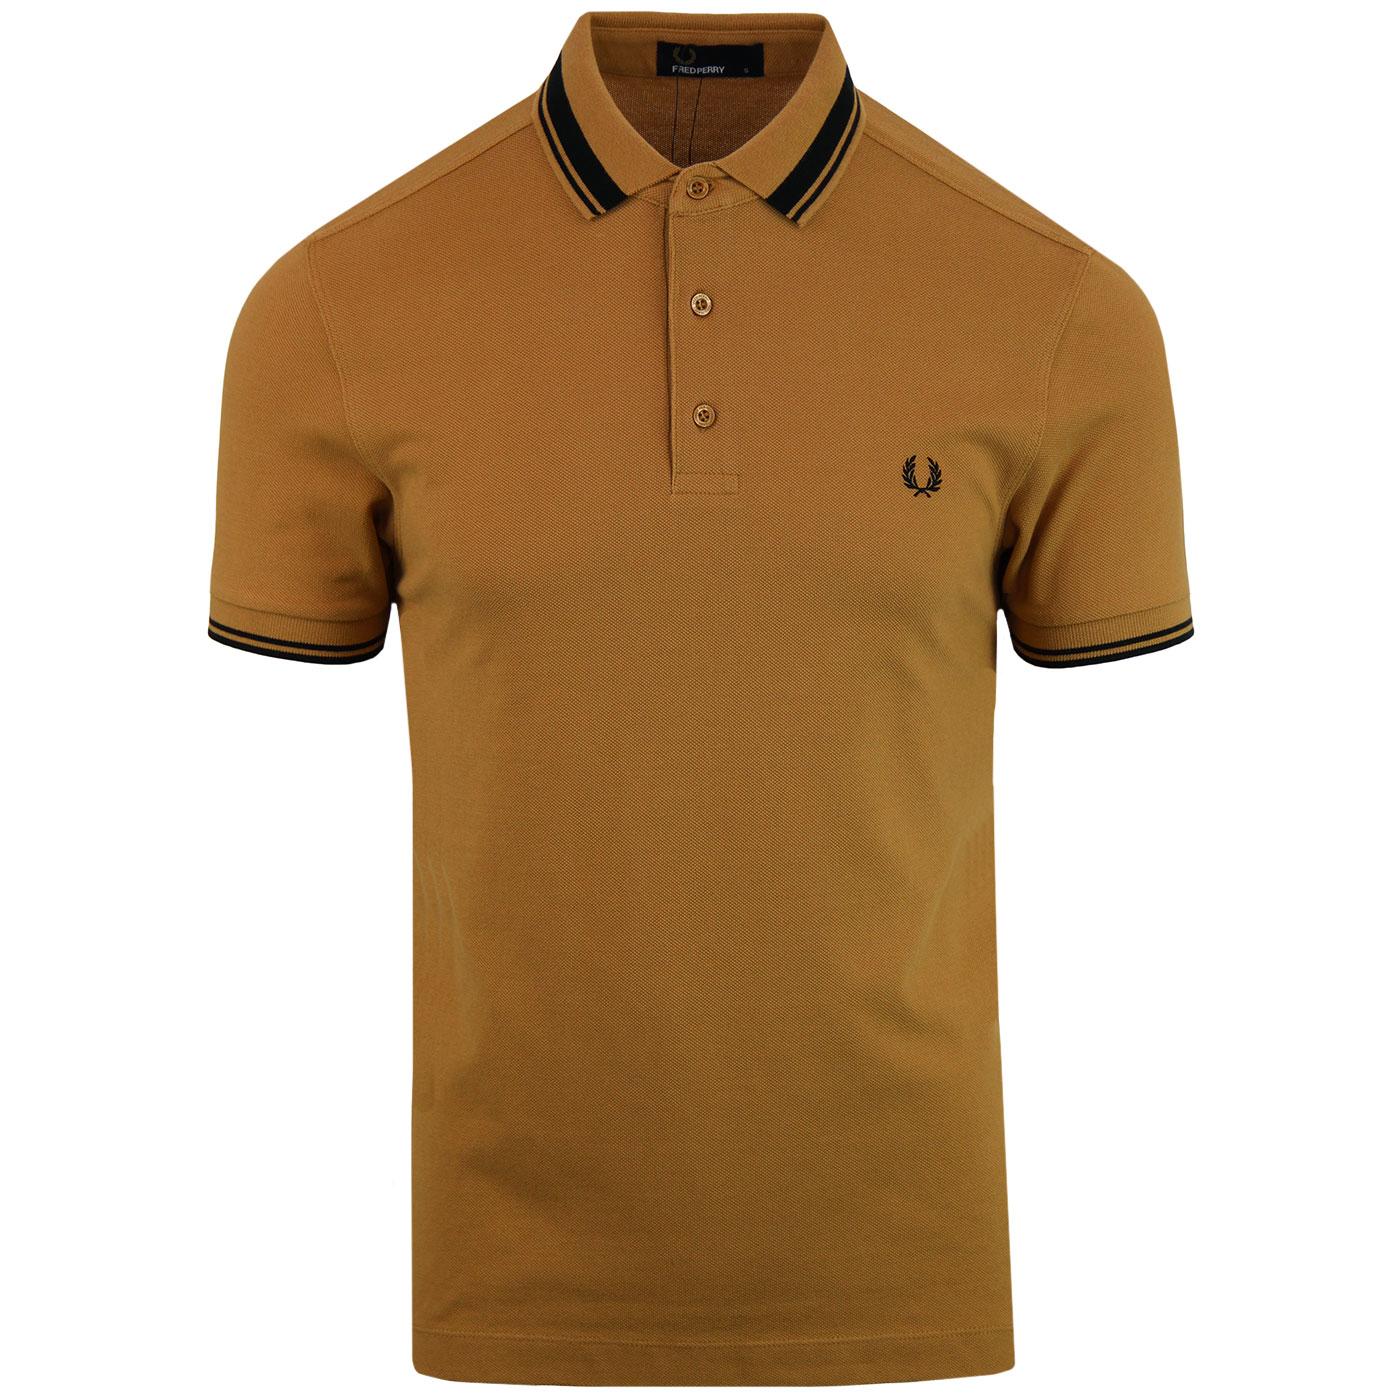 FRED PERRY Mod Contrast Tipped Pique Polo CARAMEL